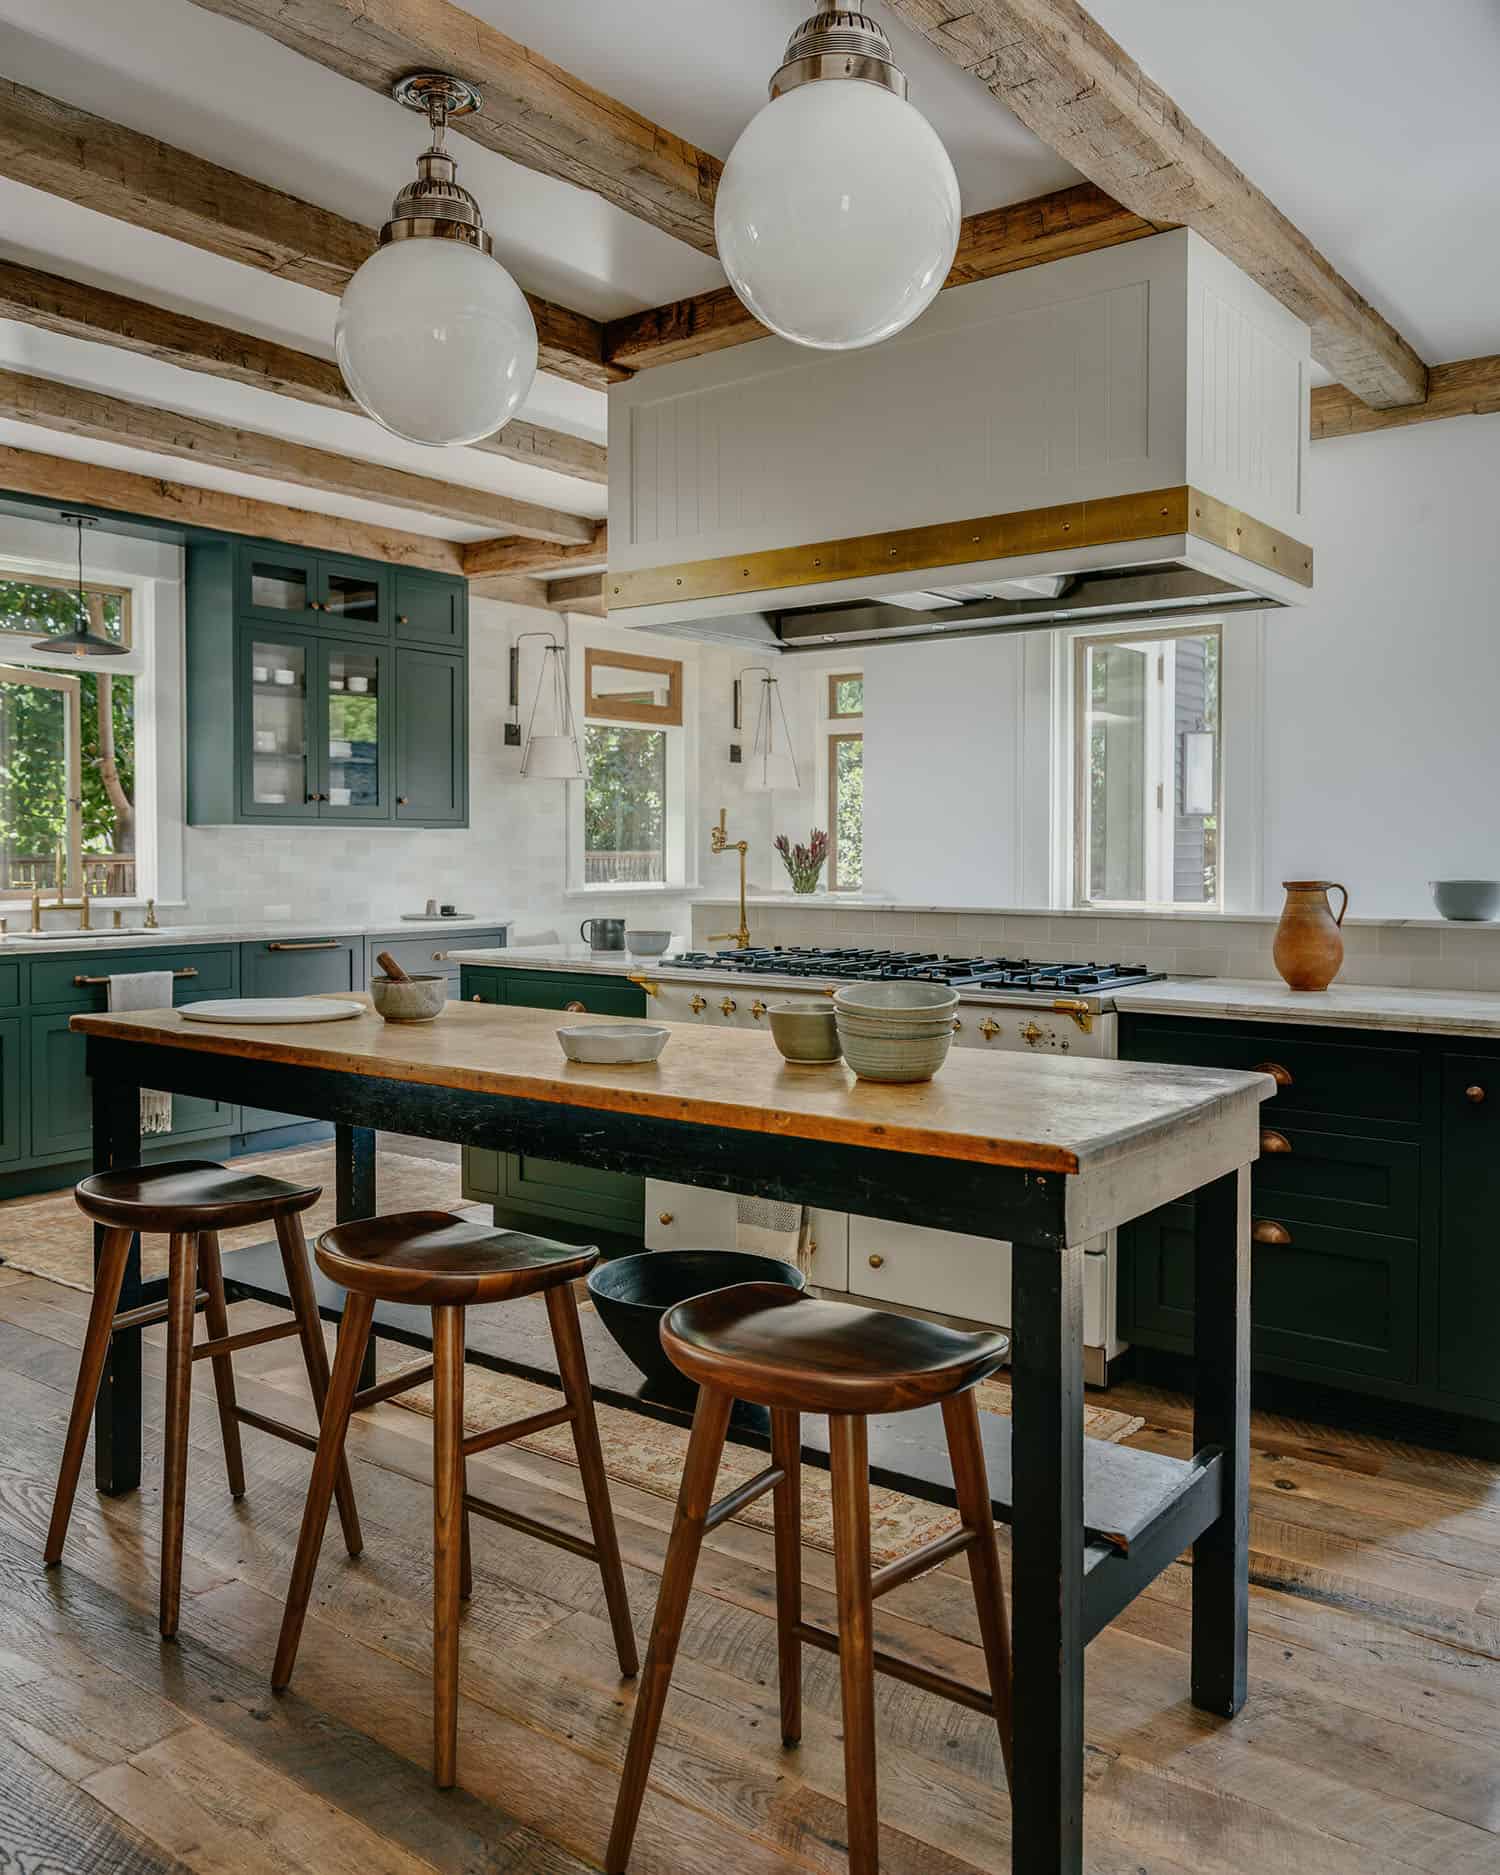 A stunning craftsman home is restored to its former glory in San Francisco